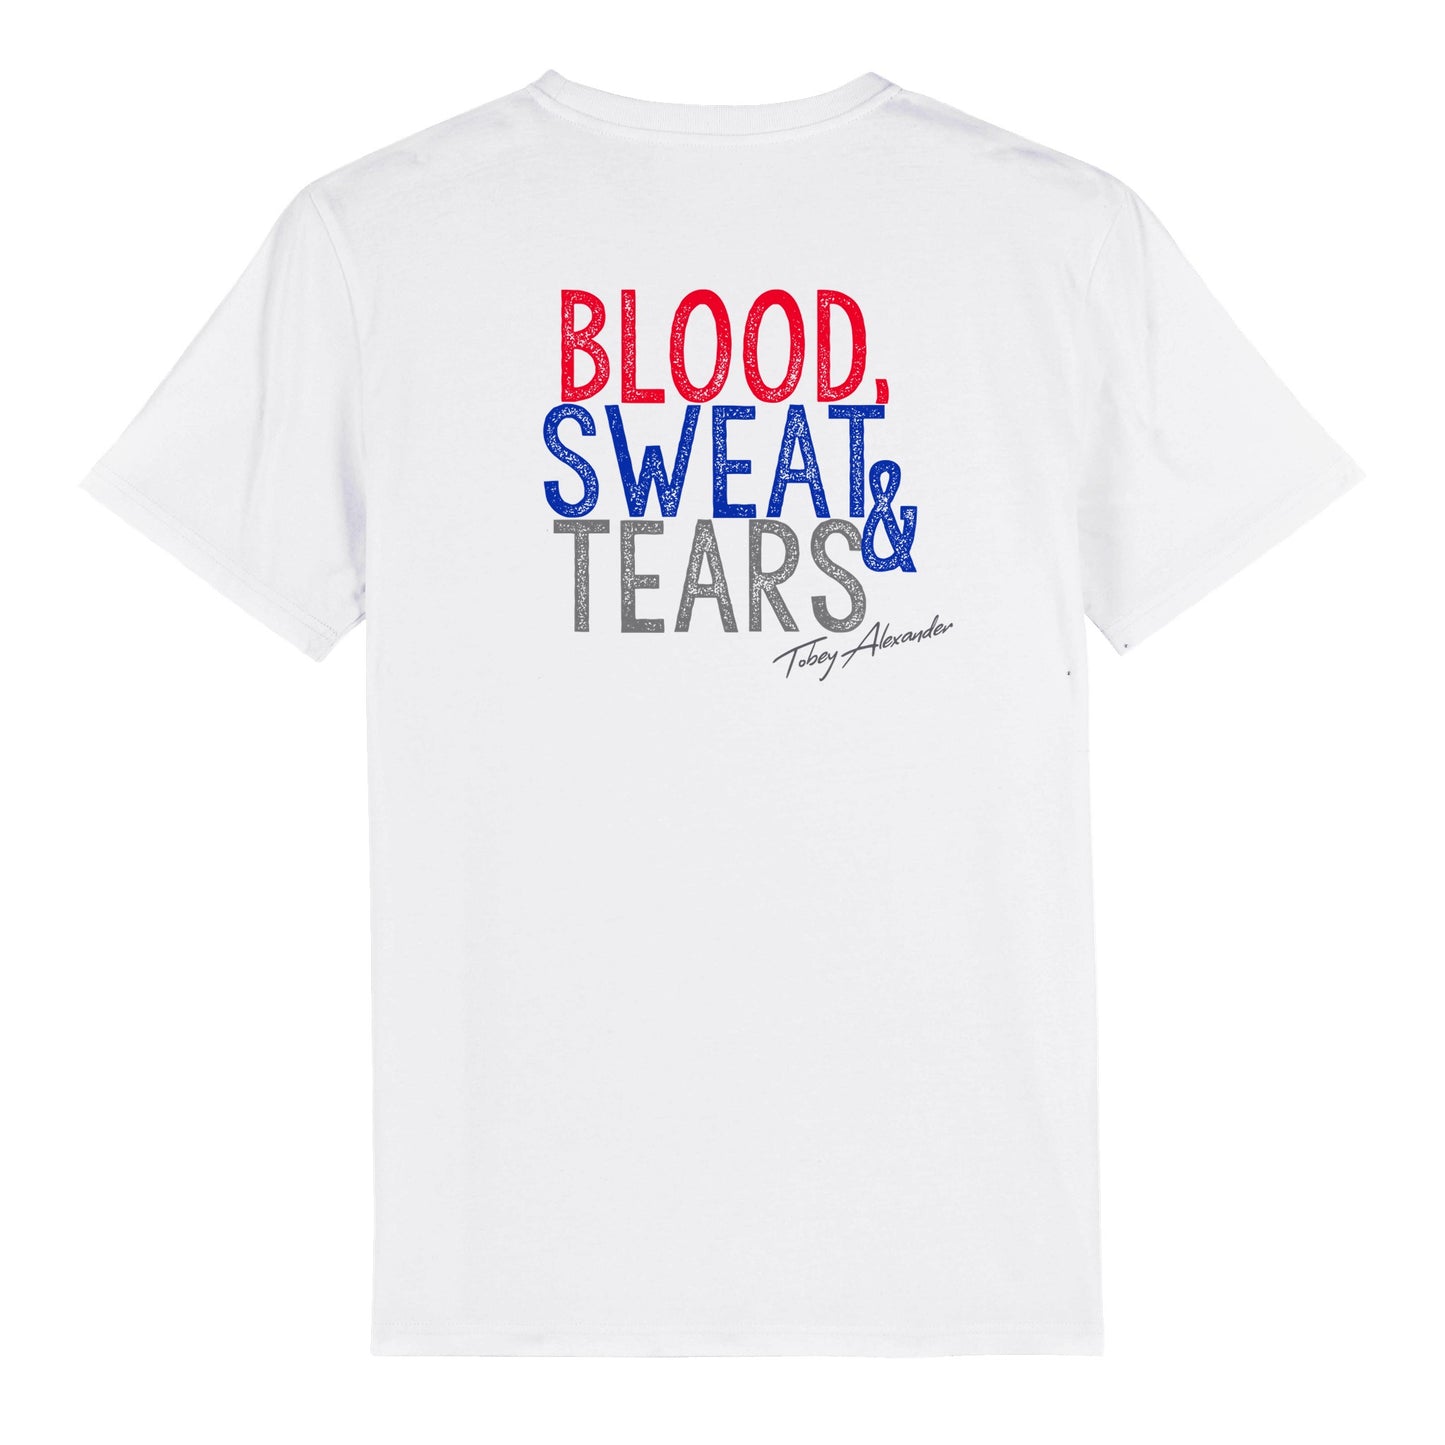 Determination Unleashed: RVN Blood, Sweat & Tears Unisex Crewneck Tee Clothes By Tobey Alexander